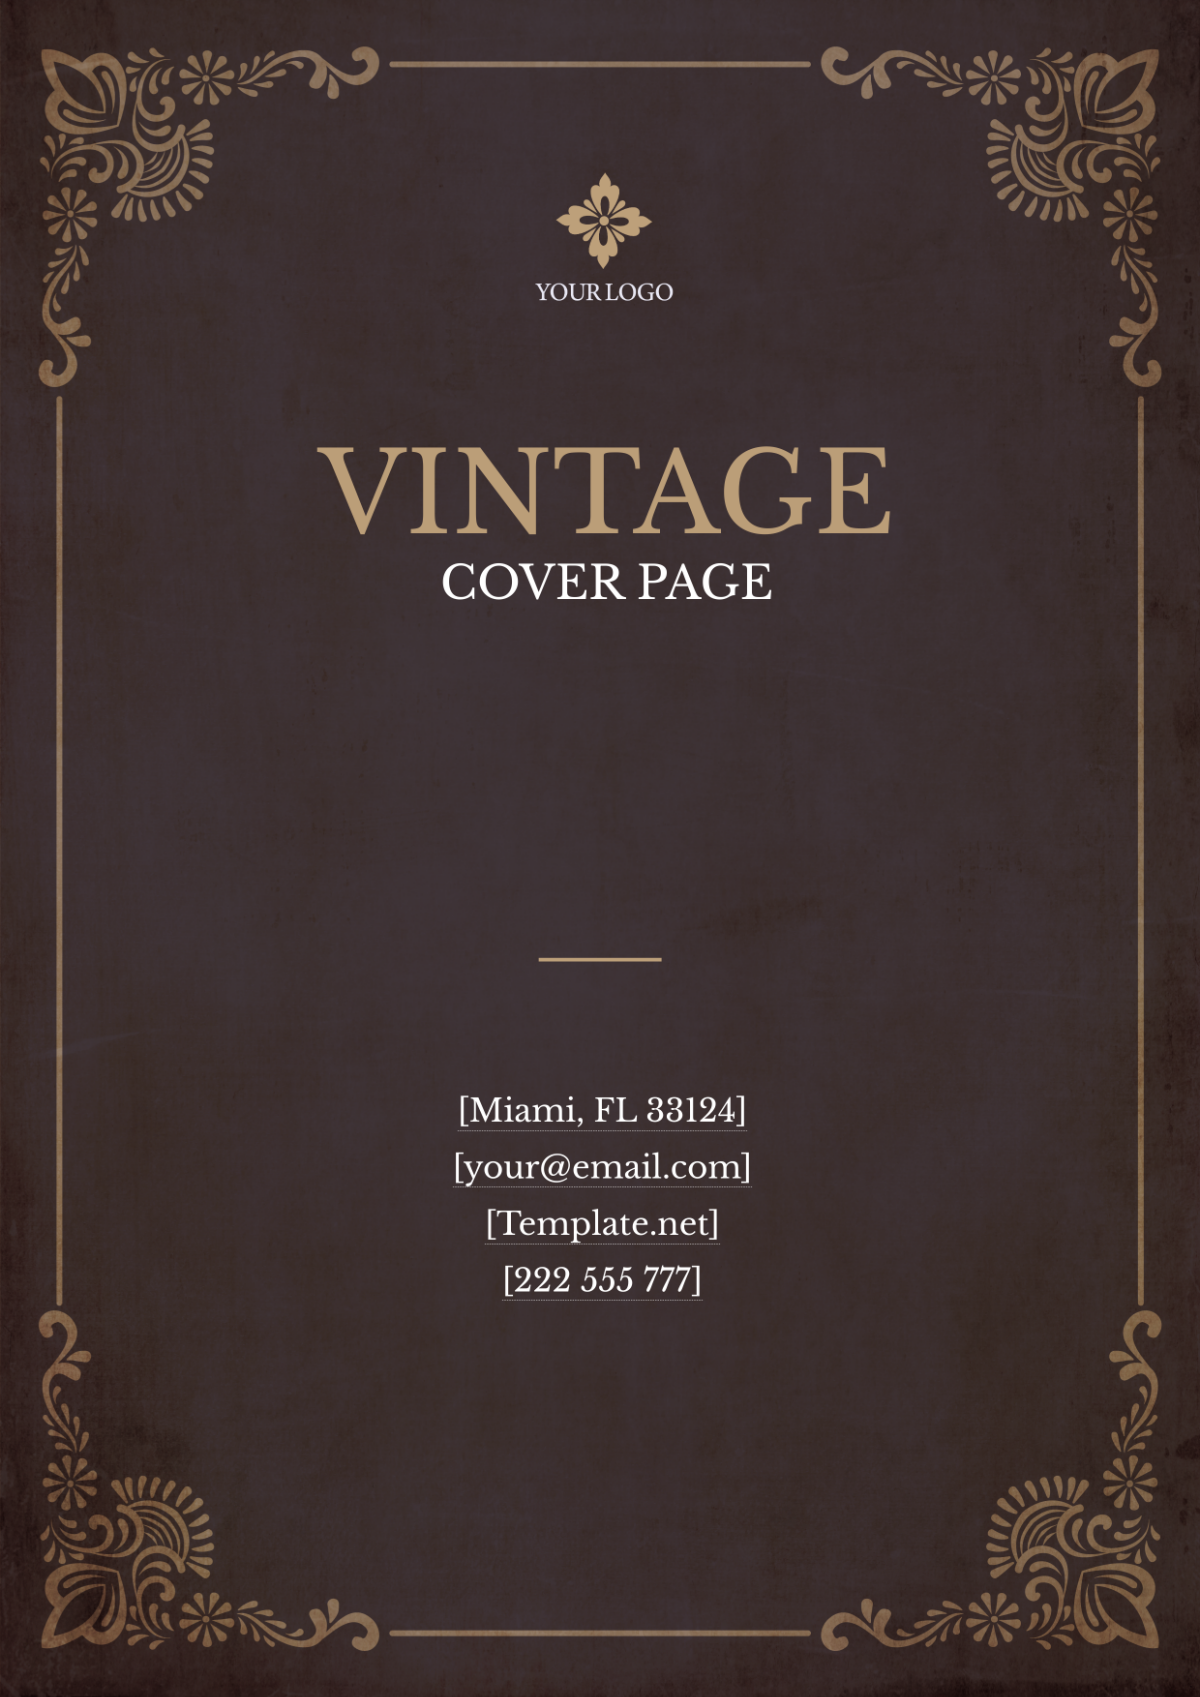 Vintage Logo Cover Page Template